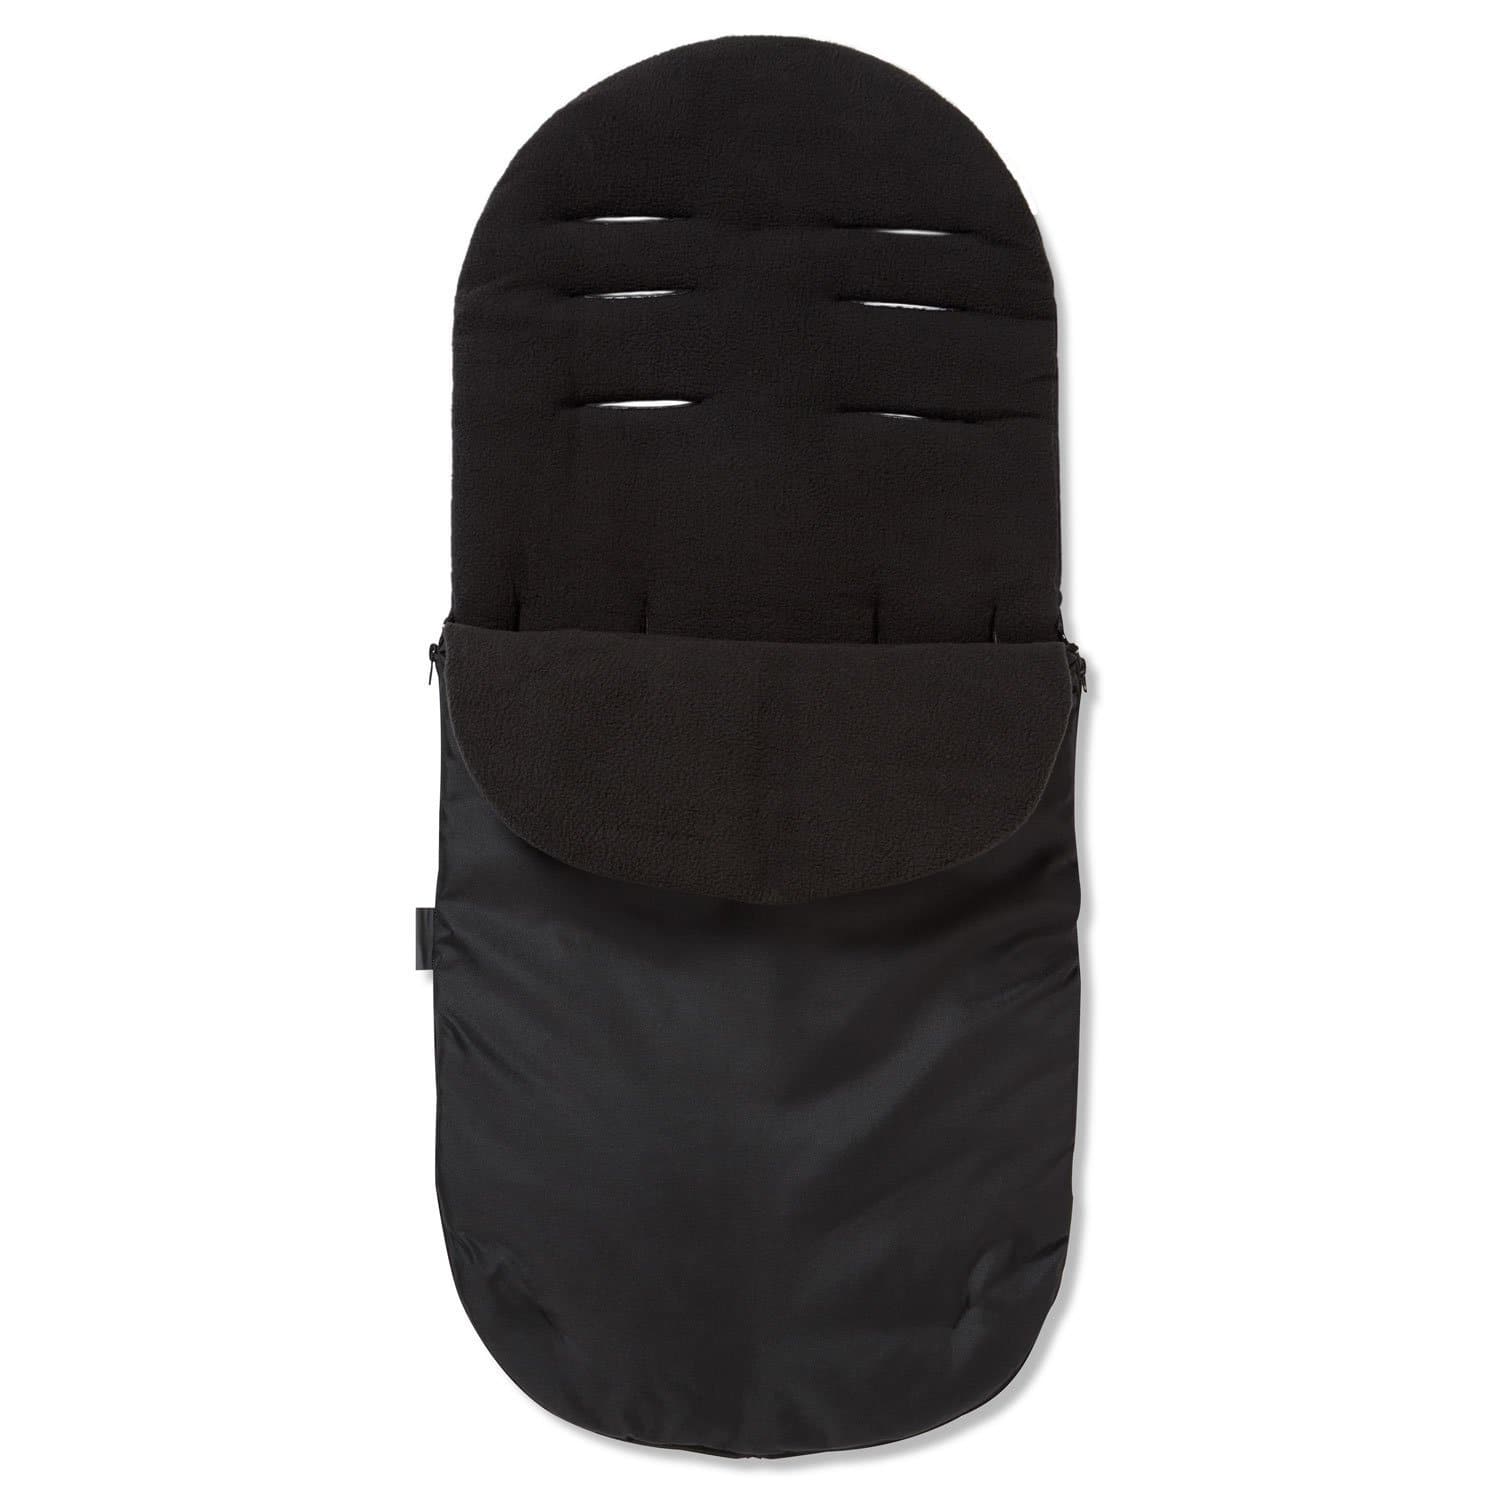 Footmuff / Cosy Toes Compatible with BabySun - Black / Fits All Models | For Your Little One